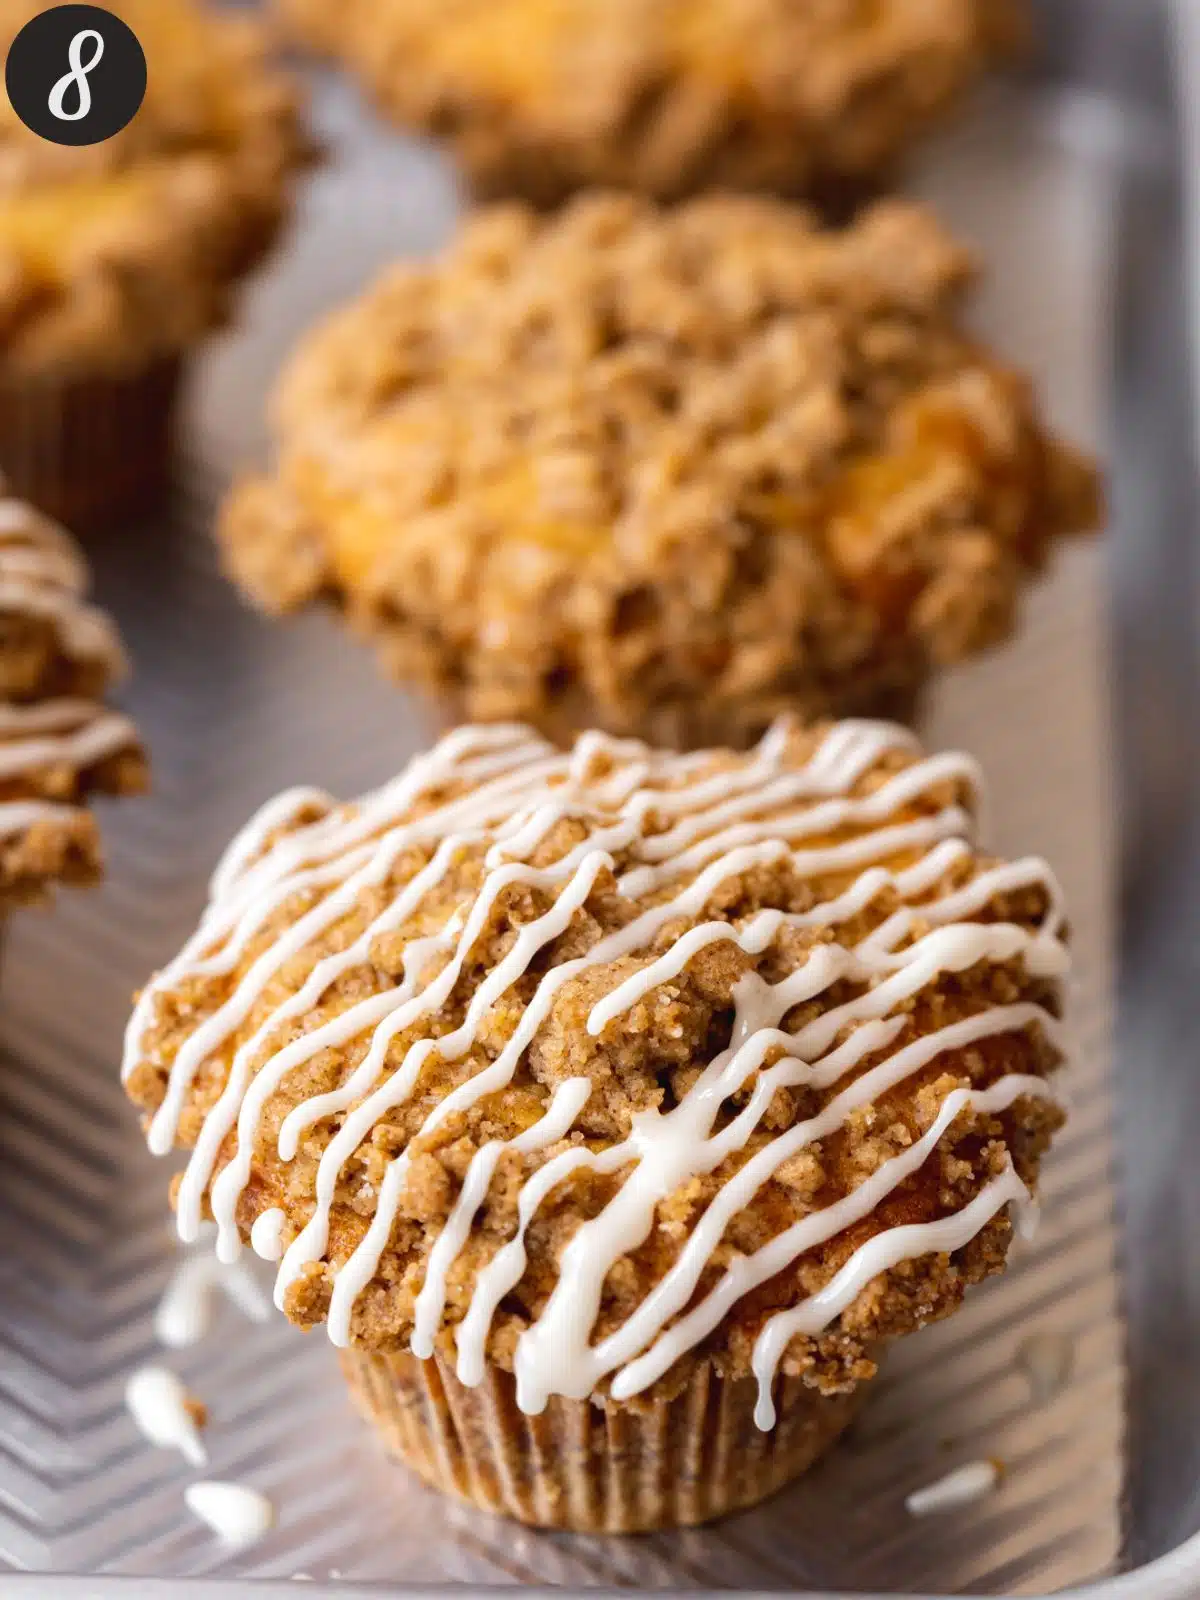 Baked and cooled cinnamon streusel muffins topped with a drizzle of glaze.